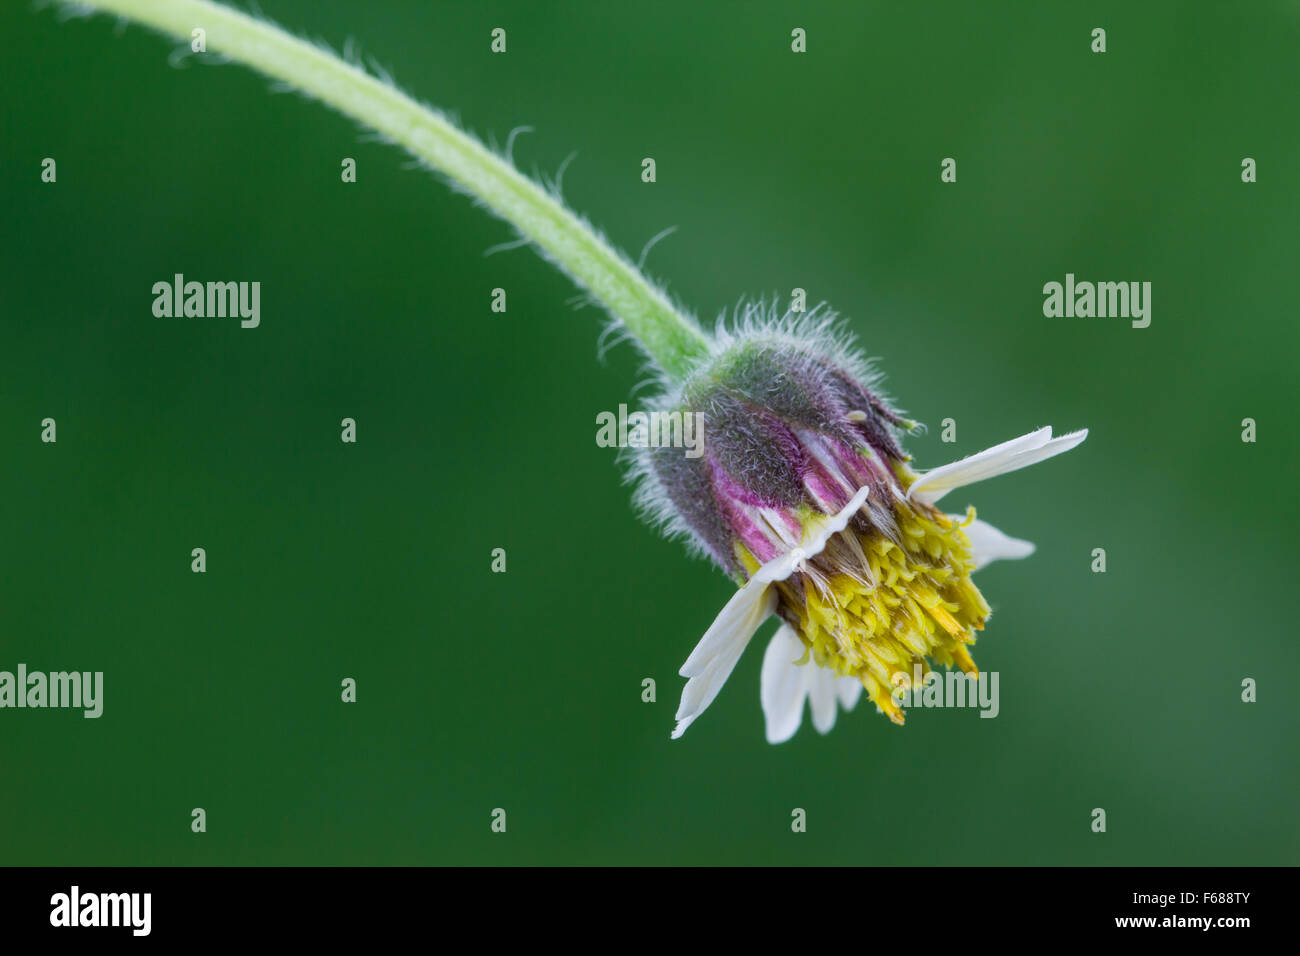 'Mexican Daisy', 'Coat Buttons' or 'Tridax Daisy' flower on green background Stock Photo